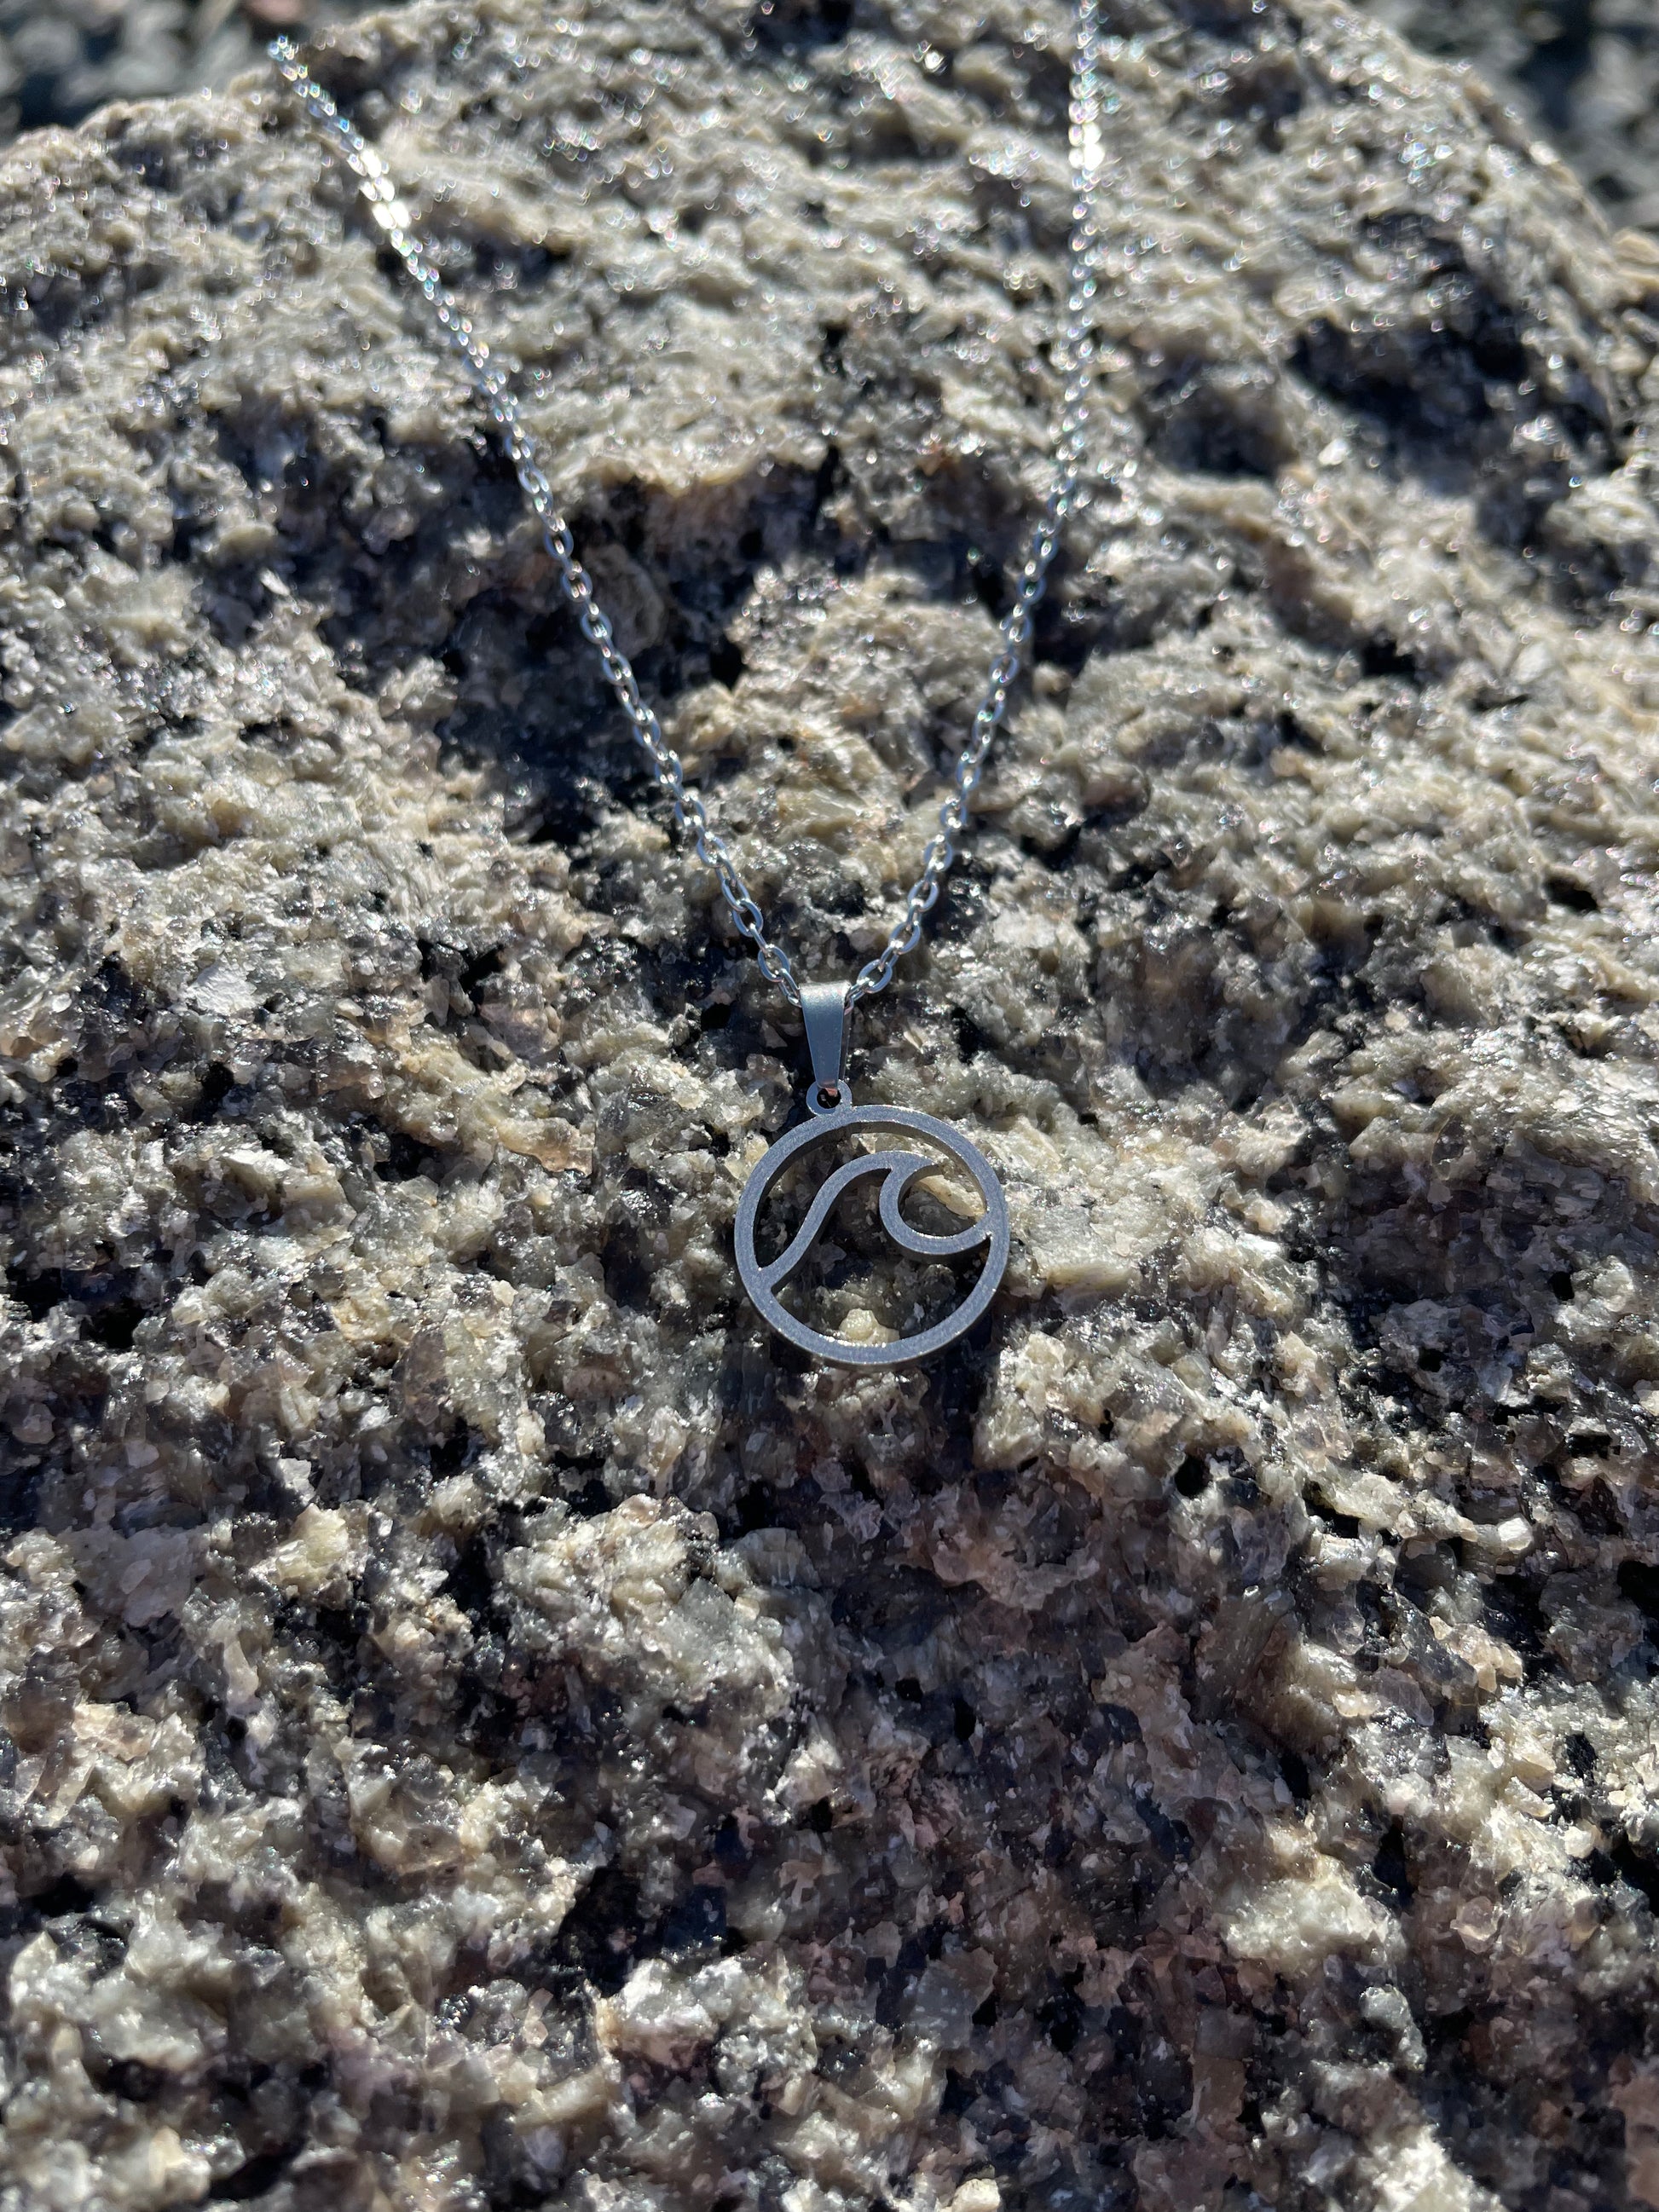 Stainless steel wave necklace laying on a rock